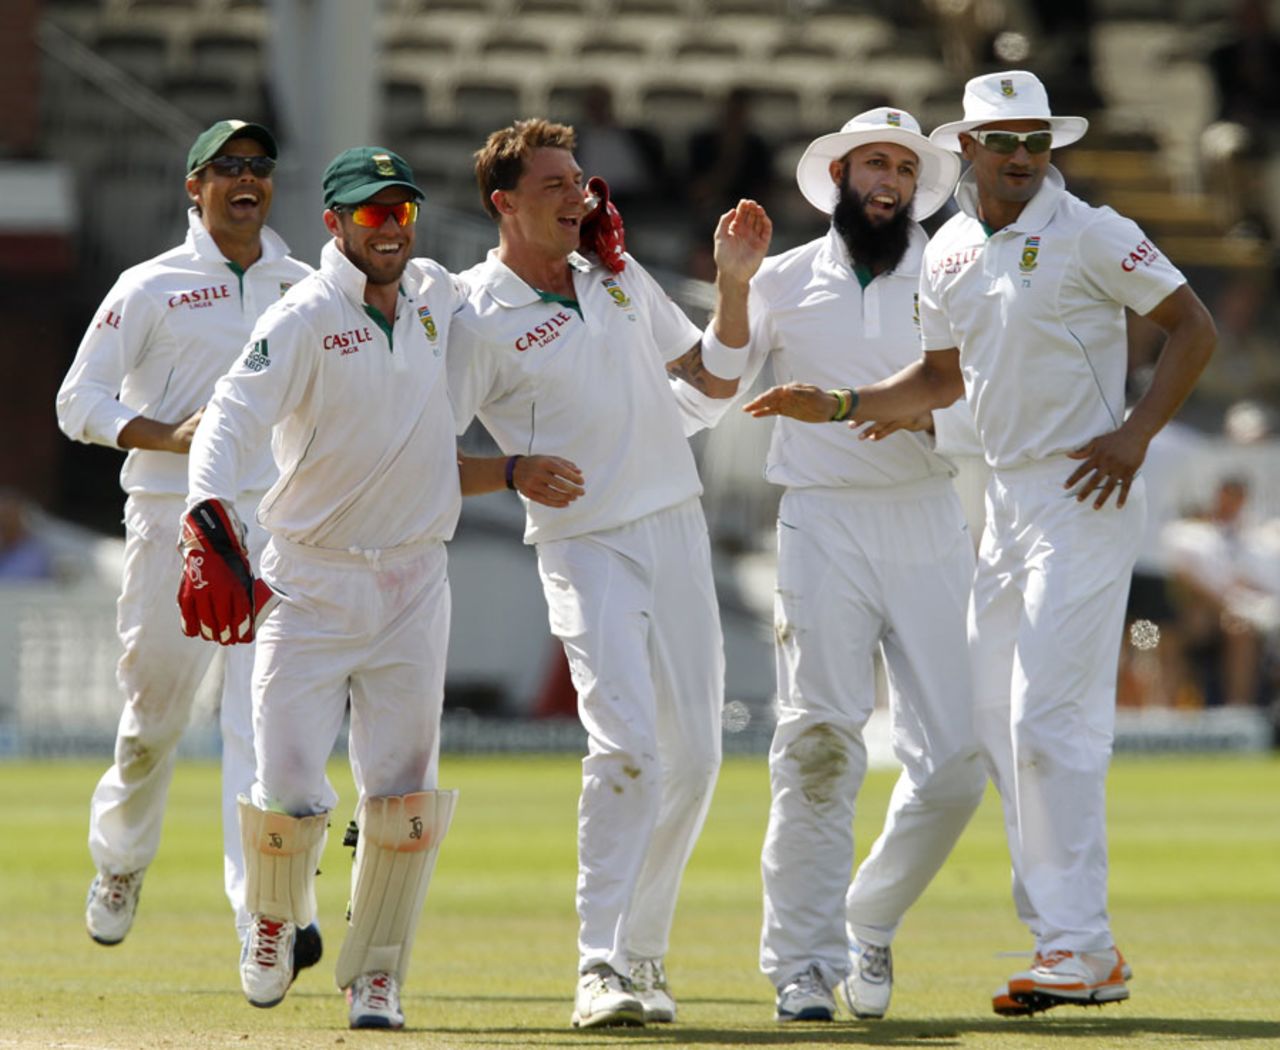 South Africa celebrate the dismissal of Jonathan Trott, England v South Africa, 3rd Investec Test, Lord's, 5th day, August 20, 2012